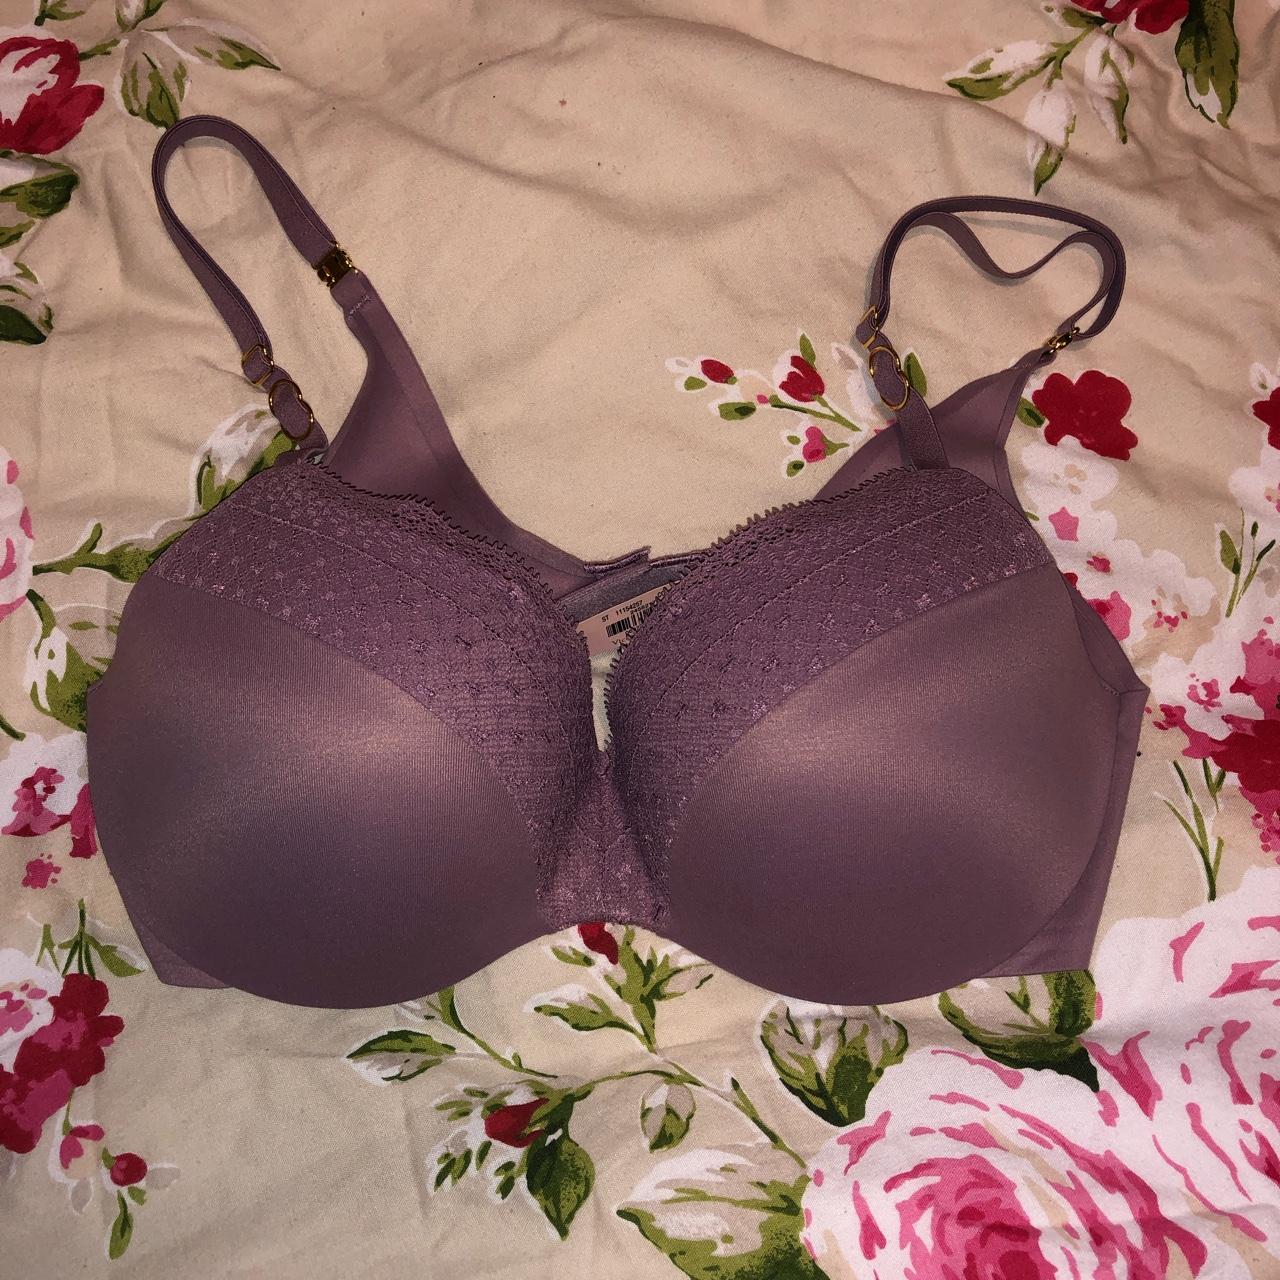 BRAND NEW WITH TAGS 💜🥳, Victoria’s Secret lilac